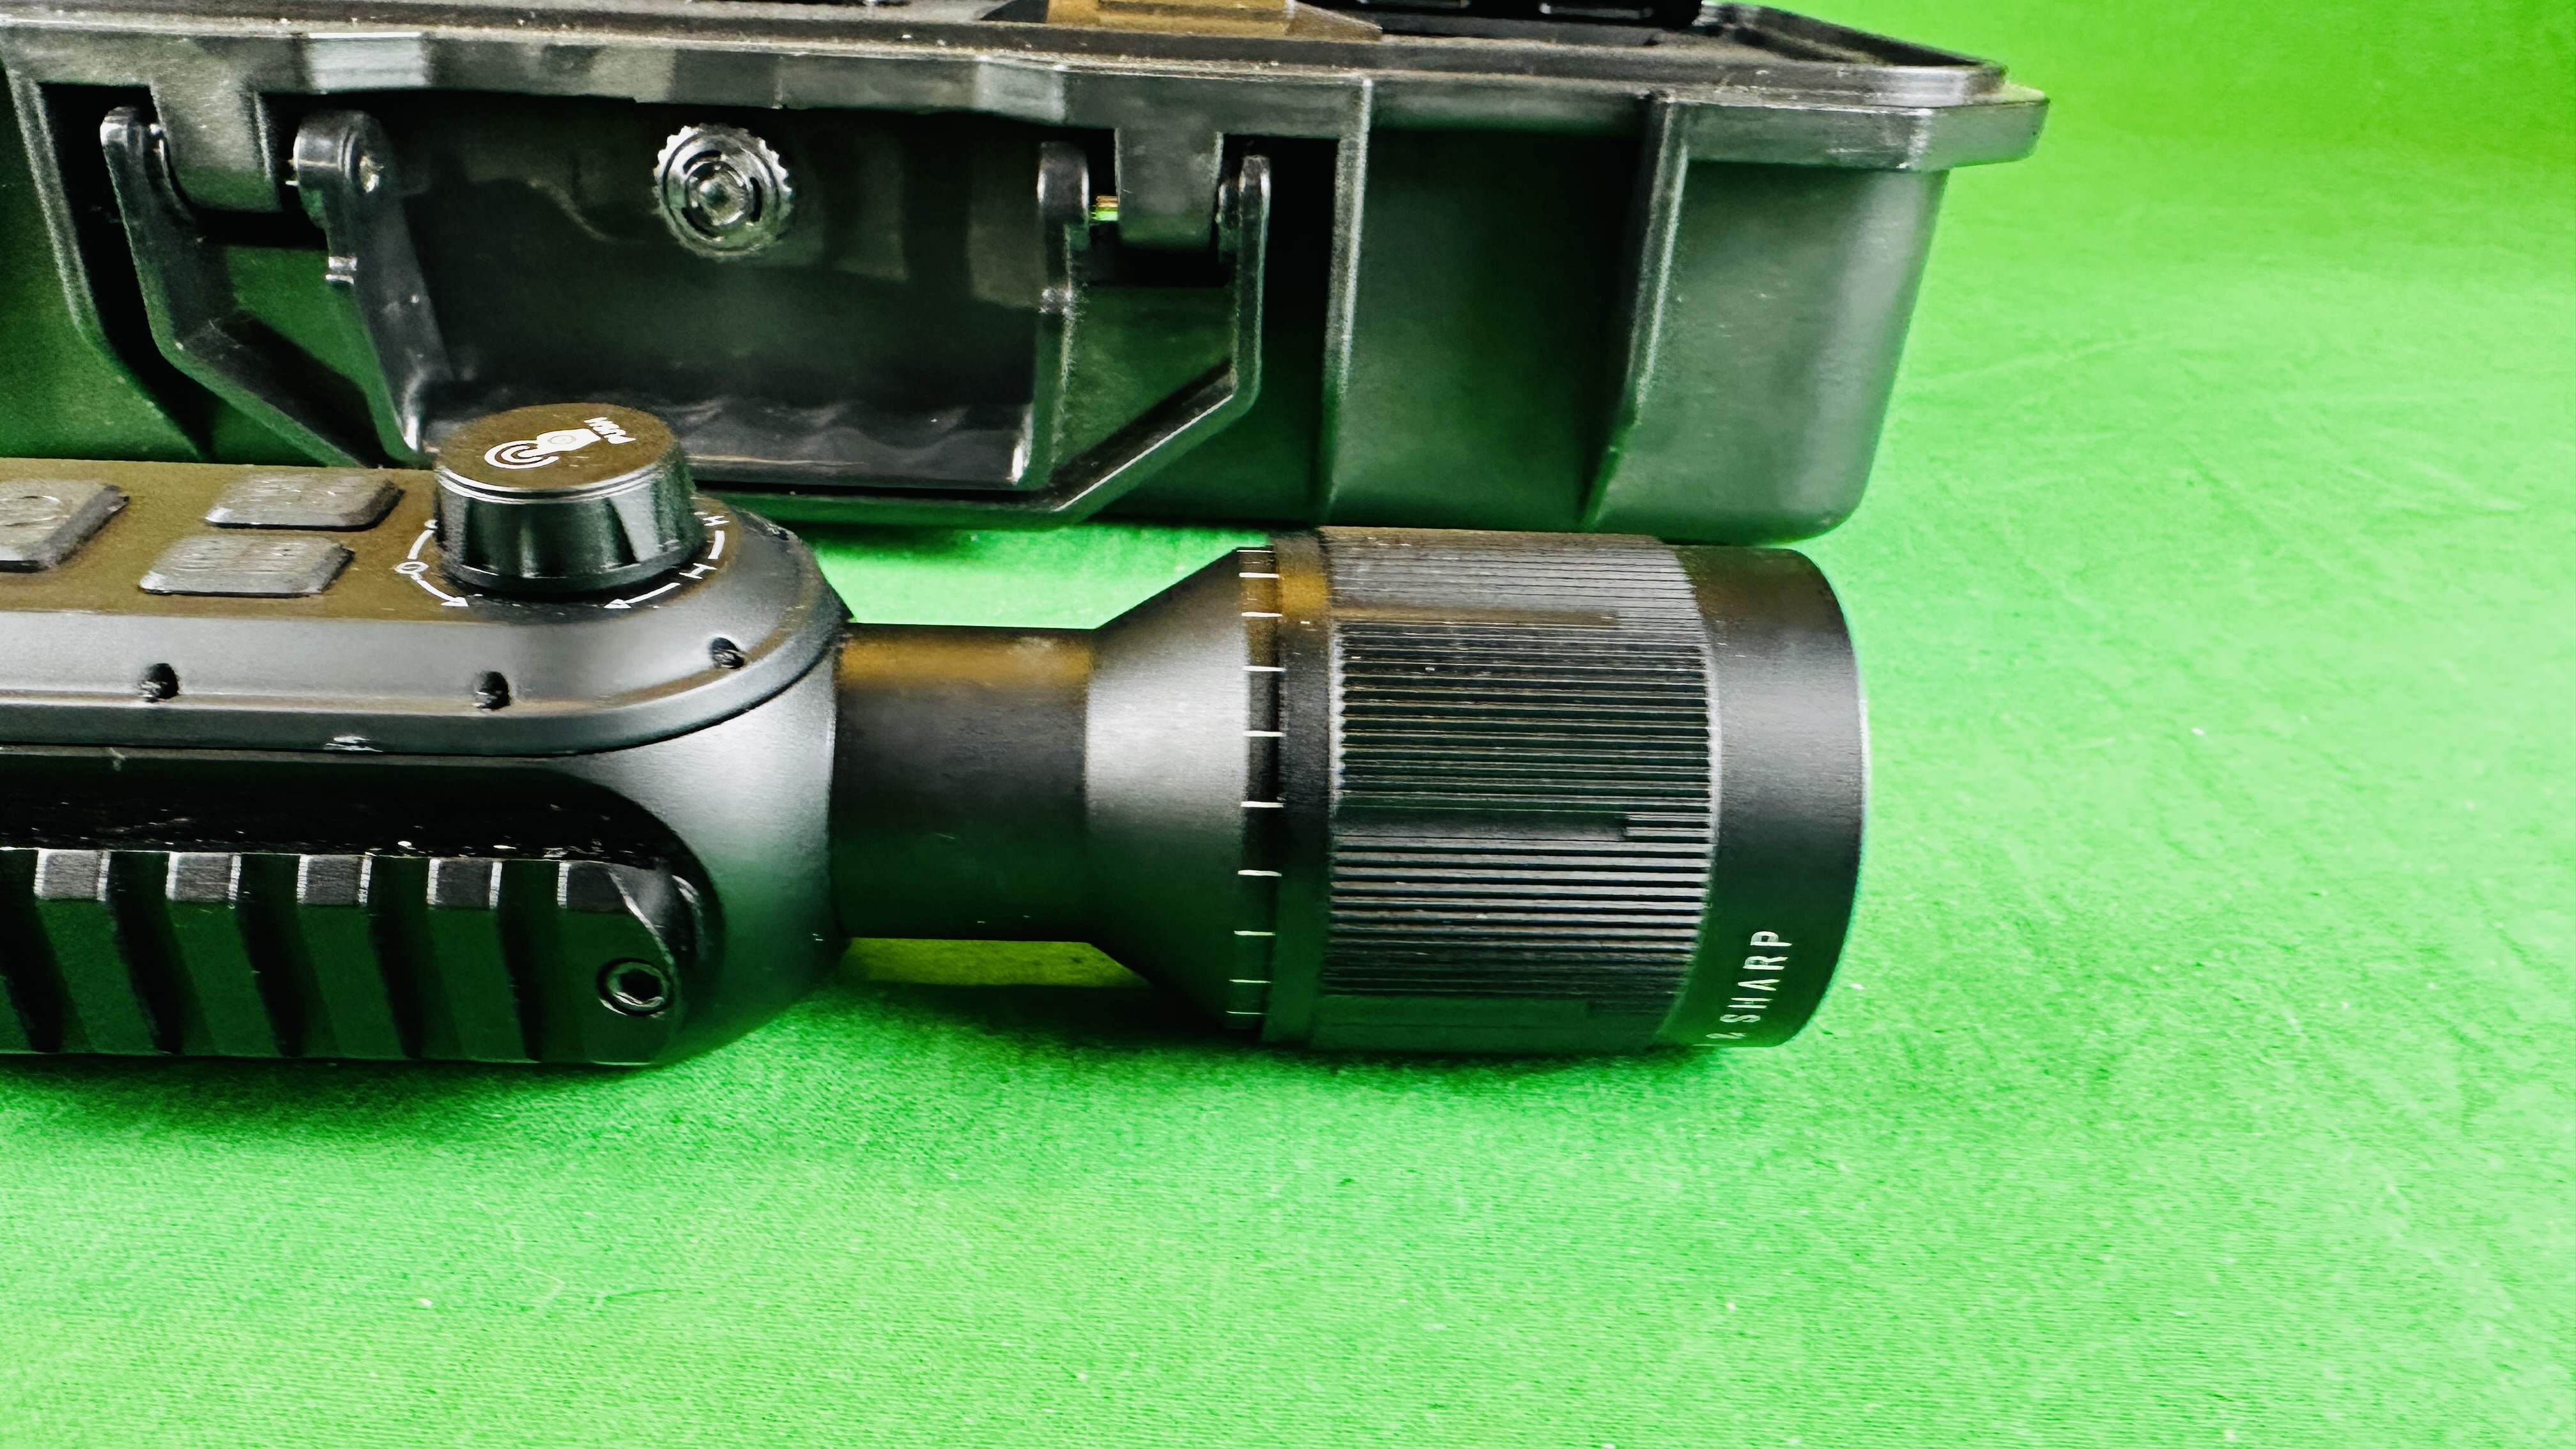 WULF 3-24X DAY/NIGHT VISION RIFLE SCOPE IN HARD SHELL CARRY CASE WITH ACCESSORIES. - Image 8 of 24